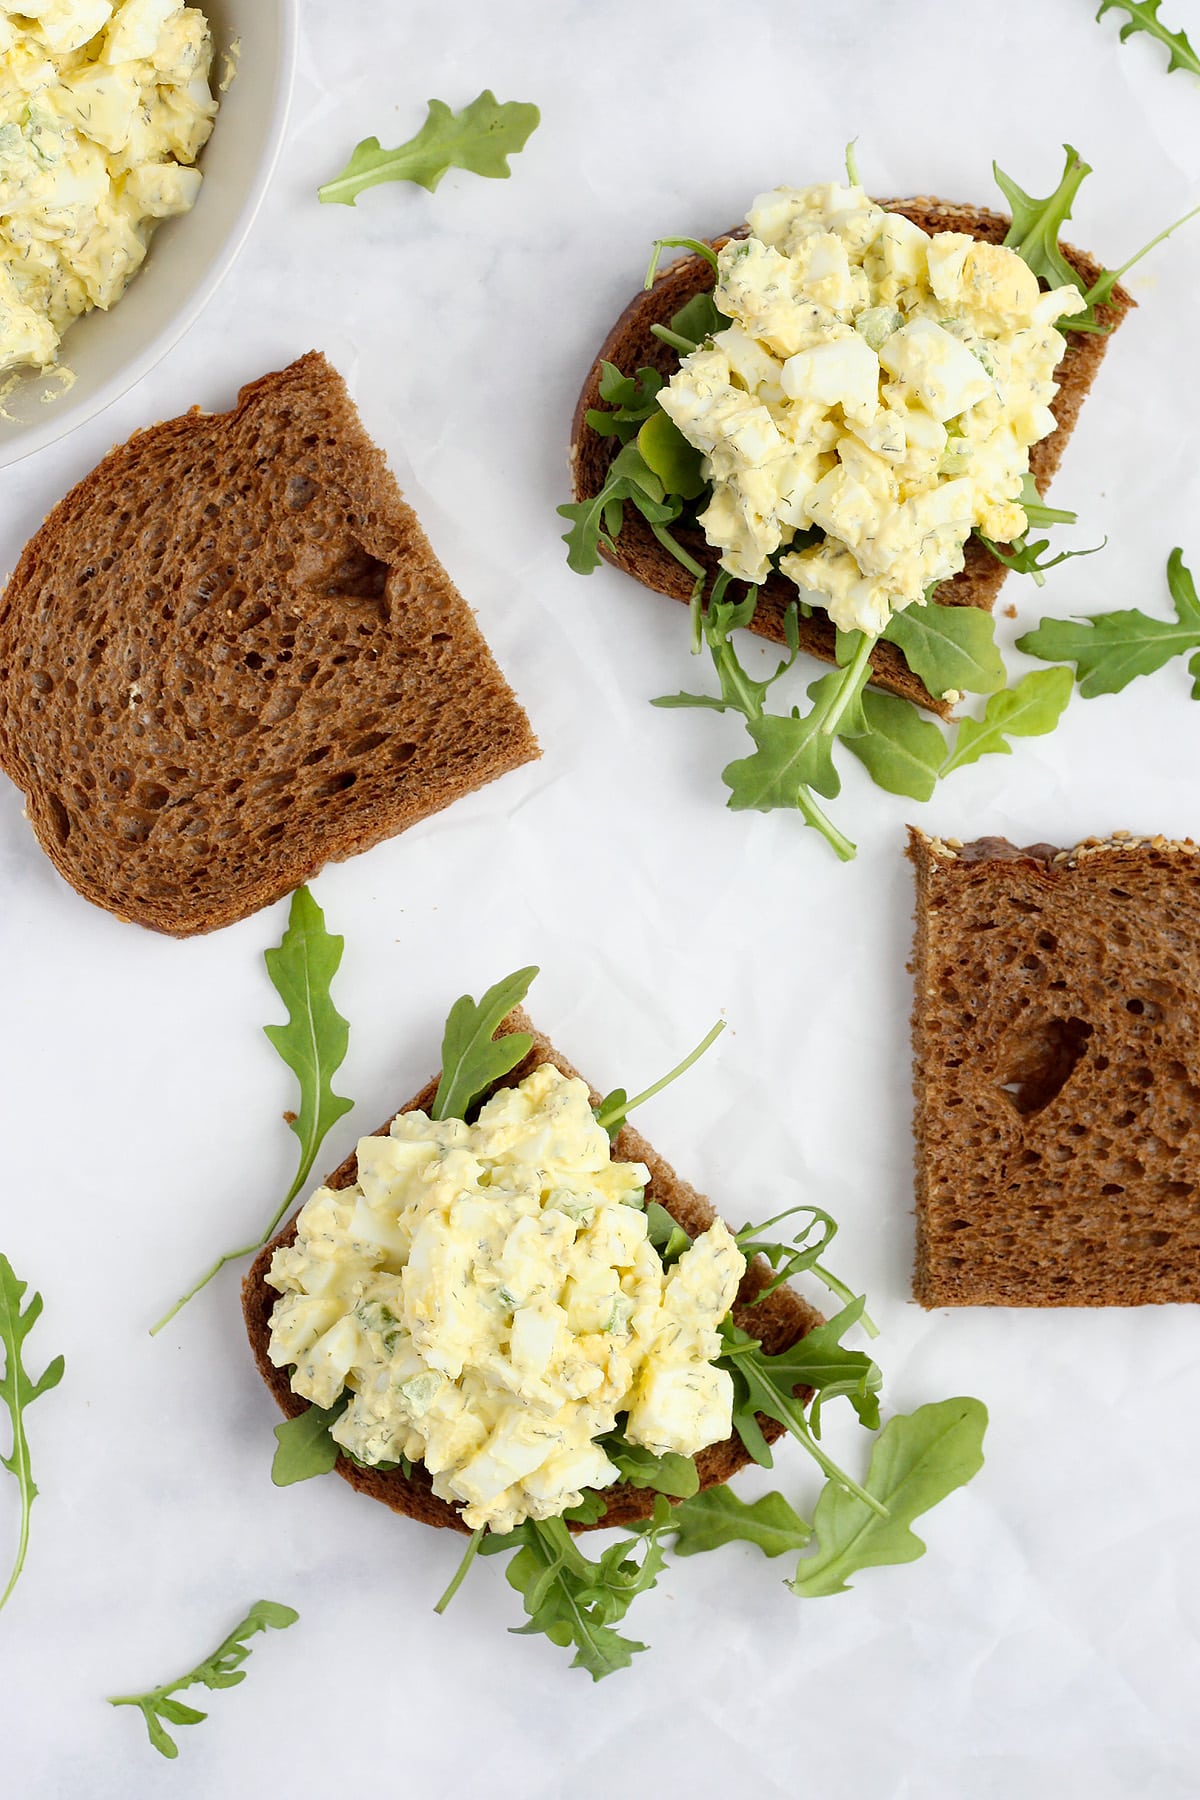 Slices of bread topped with arugula and homemade egg salad on a marble countertop.